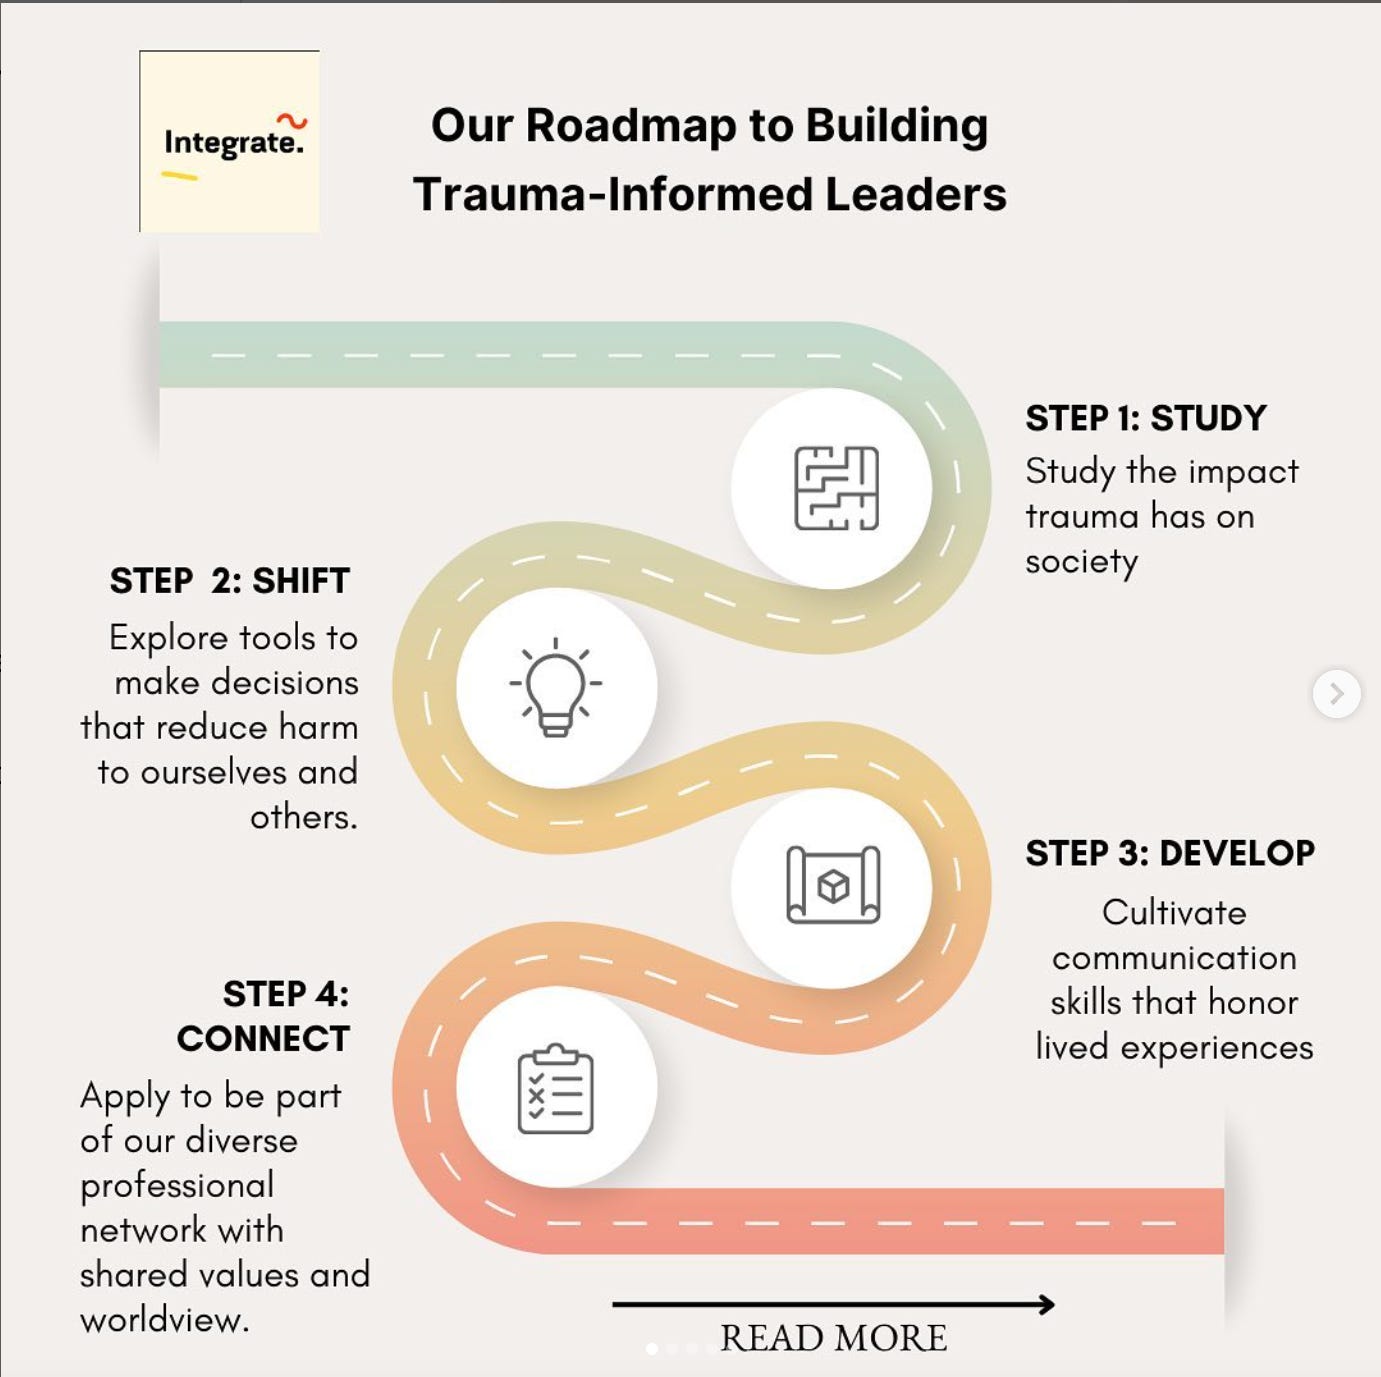 Image ID: 6 slides; Slide 1 depicts our road map to developing Truama Informed leadership; Slide 2-6 are visual representations of the steps that can be found in text format in the caption of the post